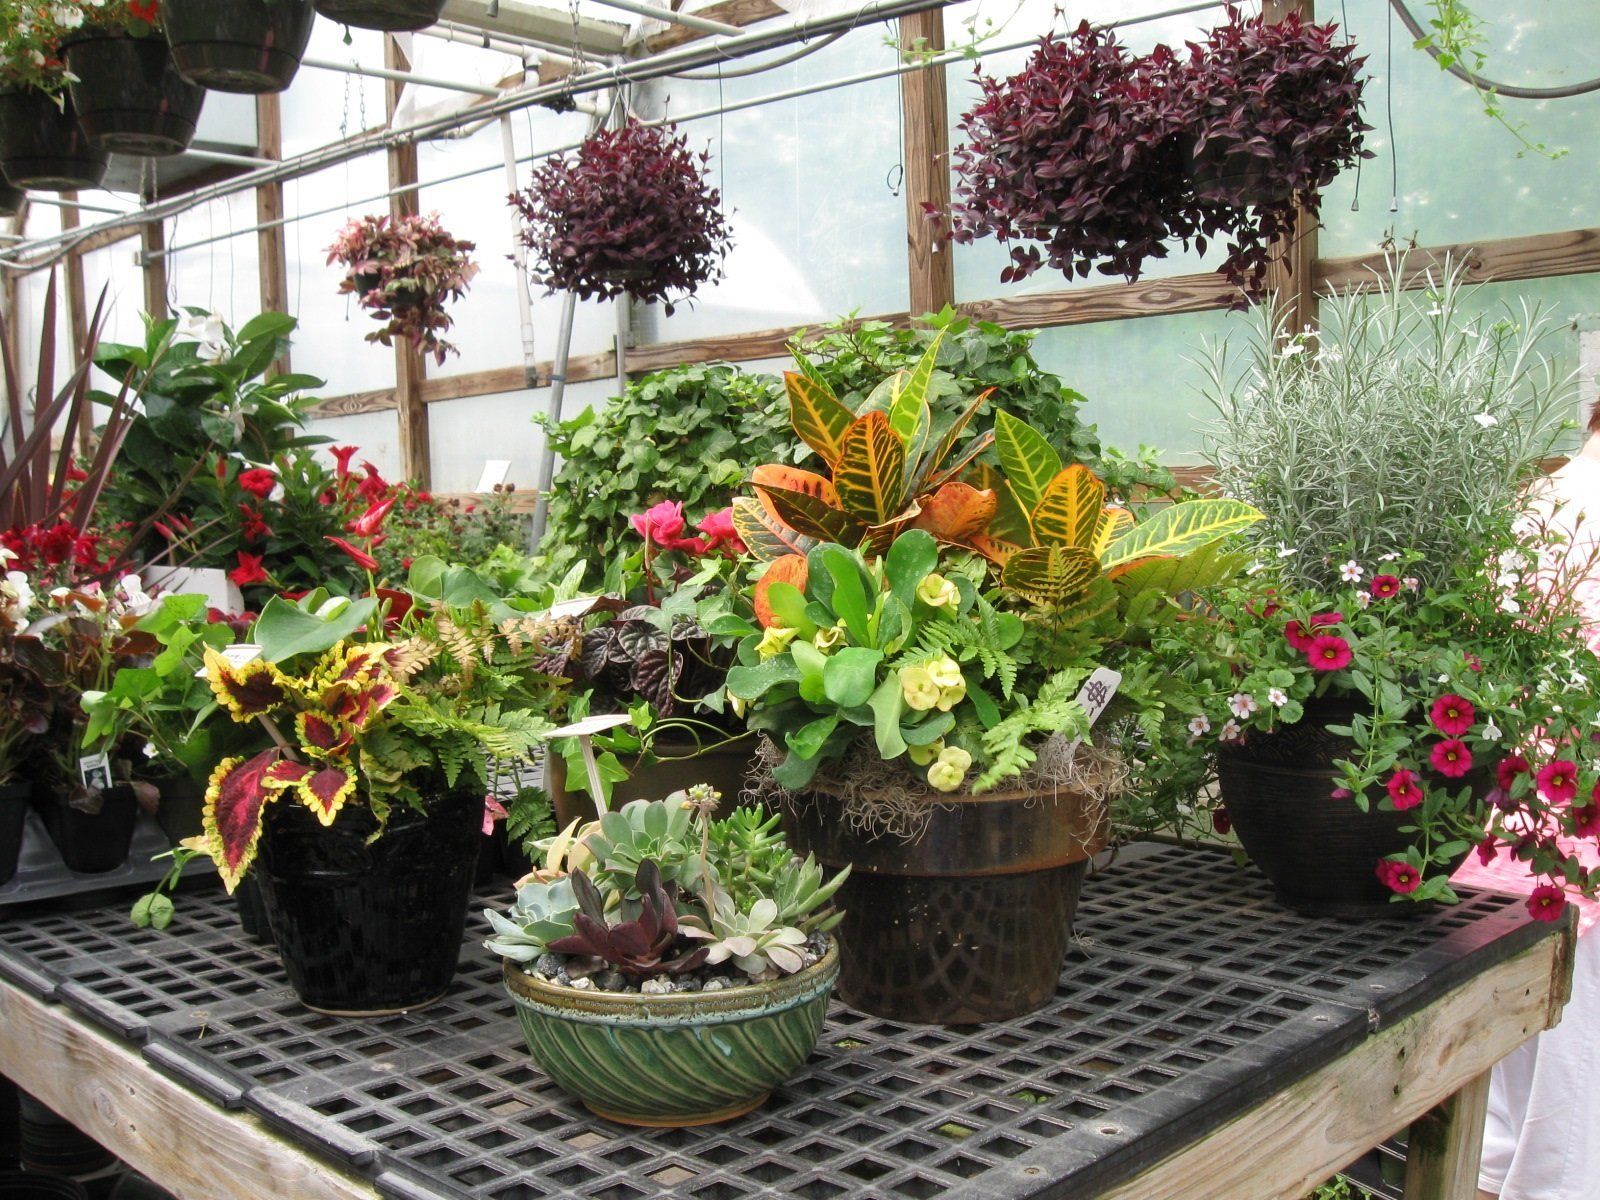 Bedding Plants for Clemmons, NC